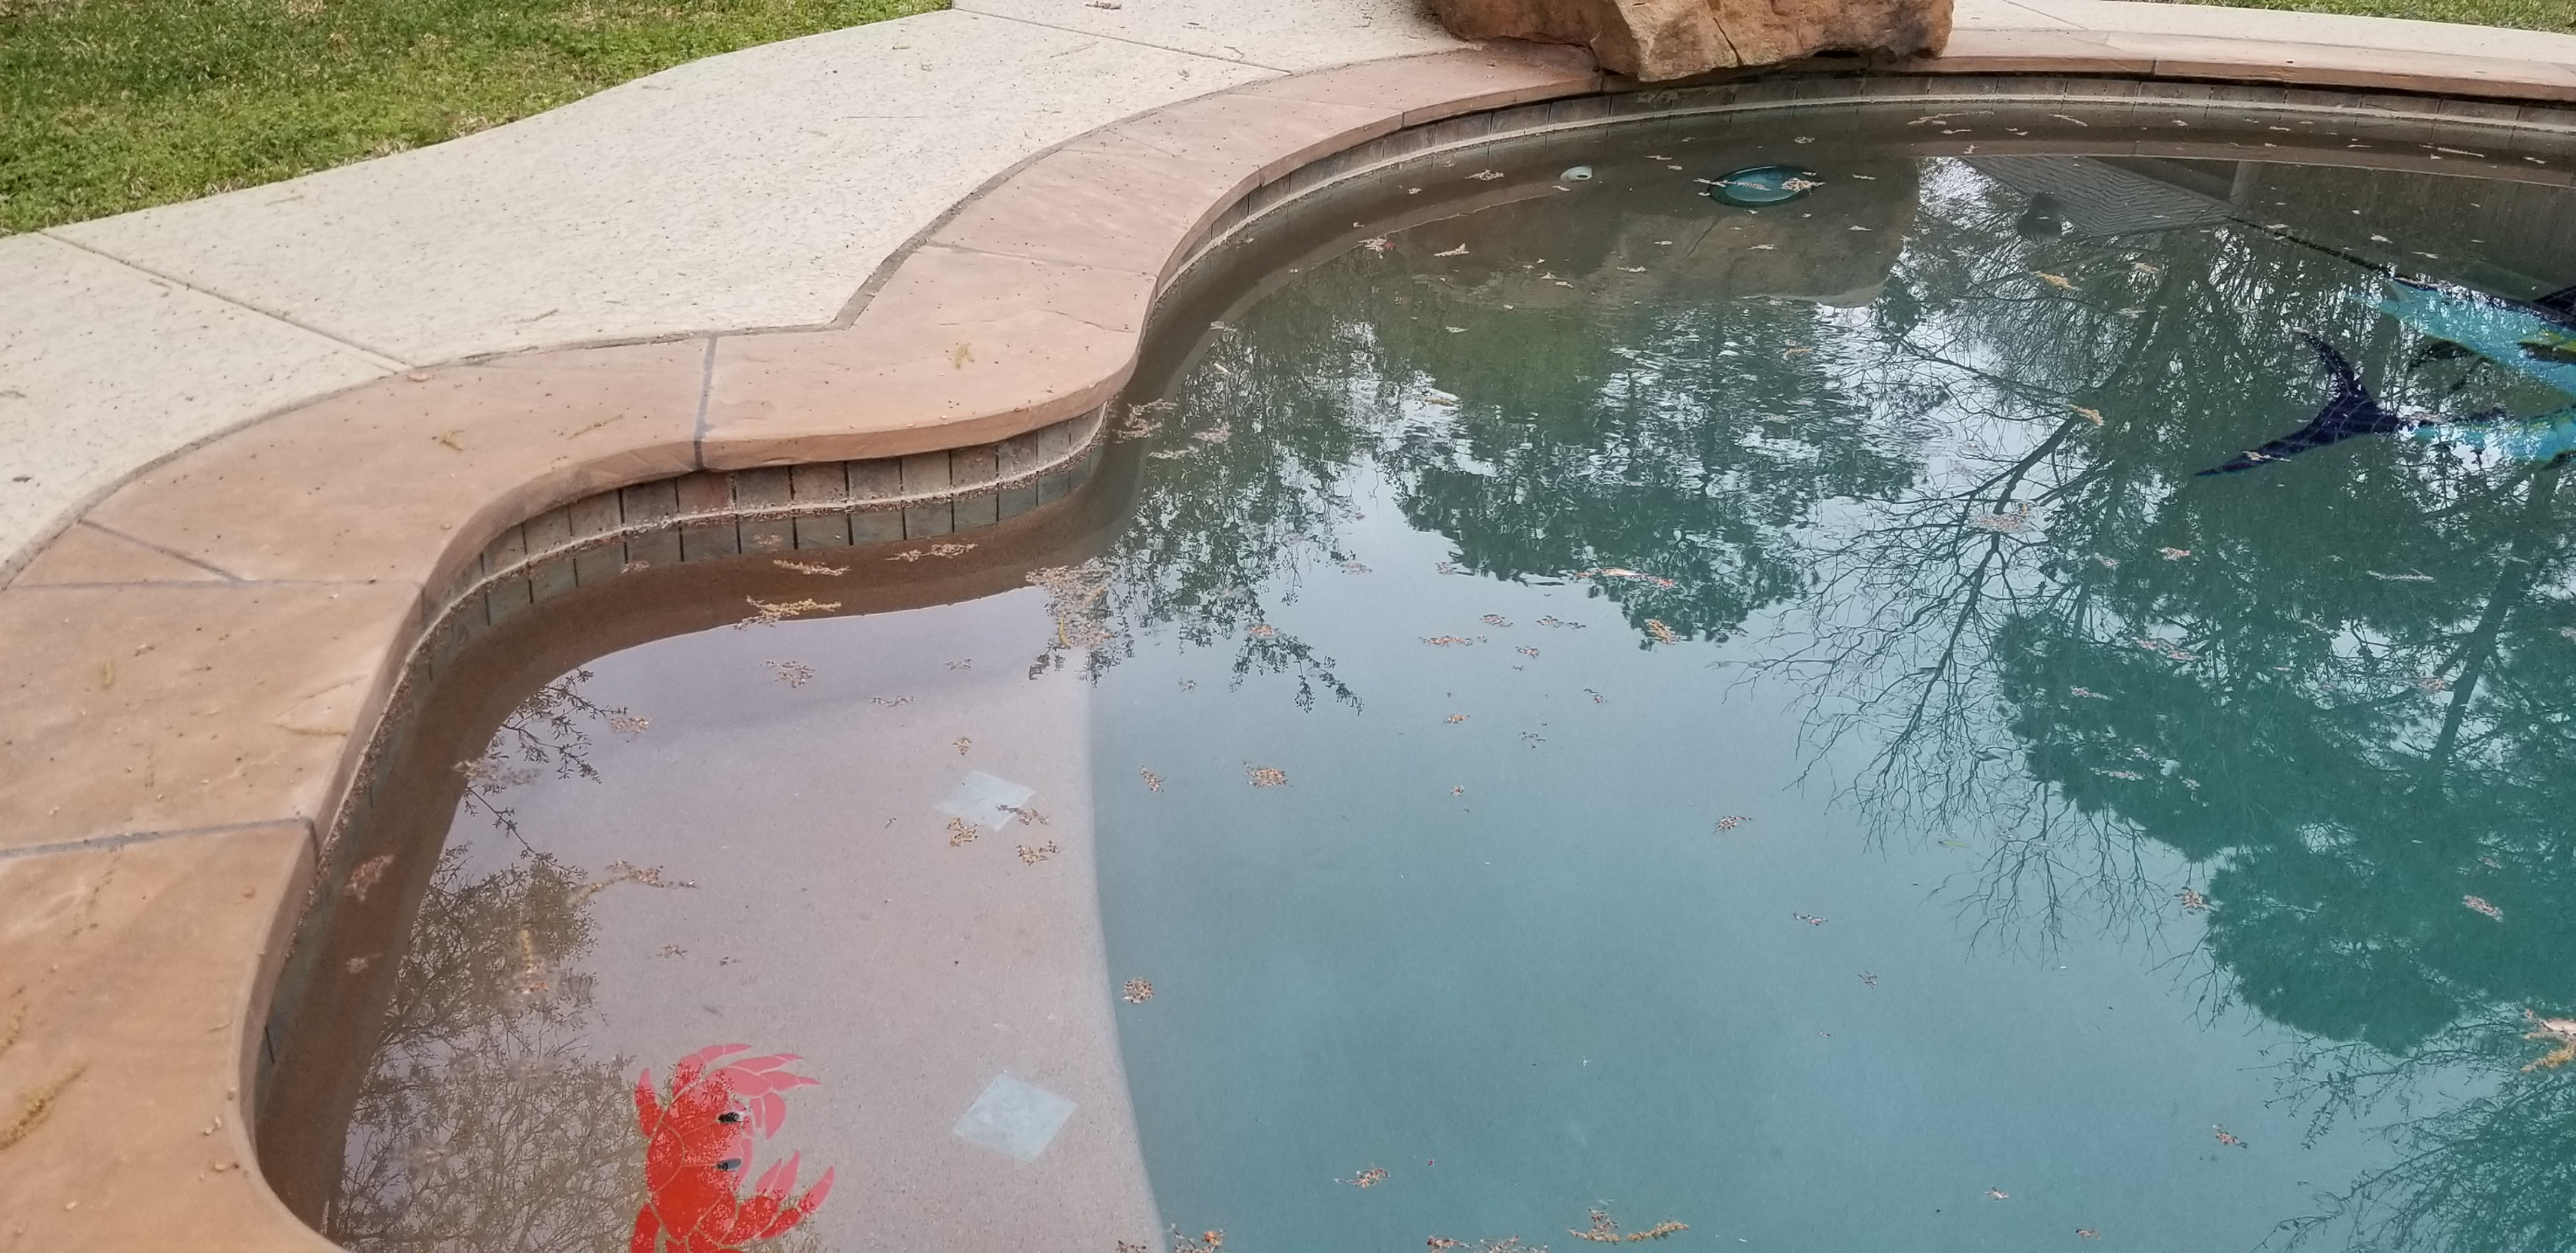 How to Deal with Pollen in the Pool - Professional Pool Supply